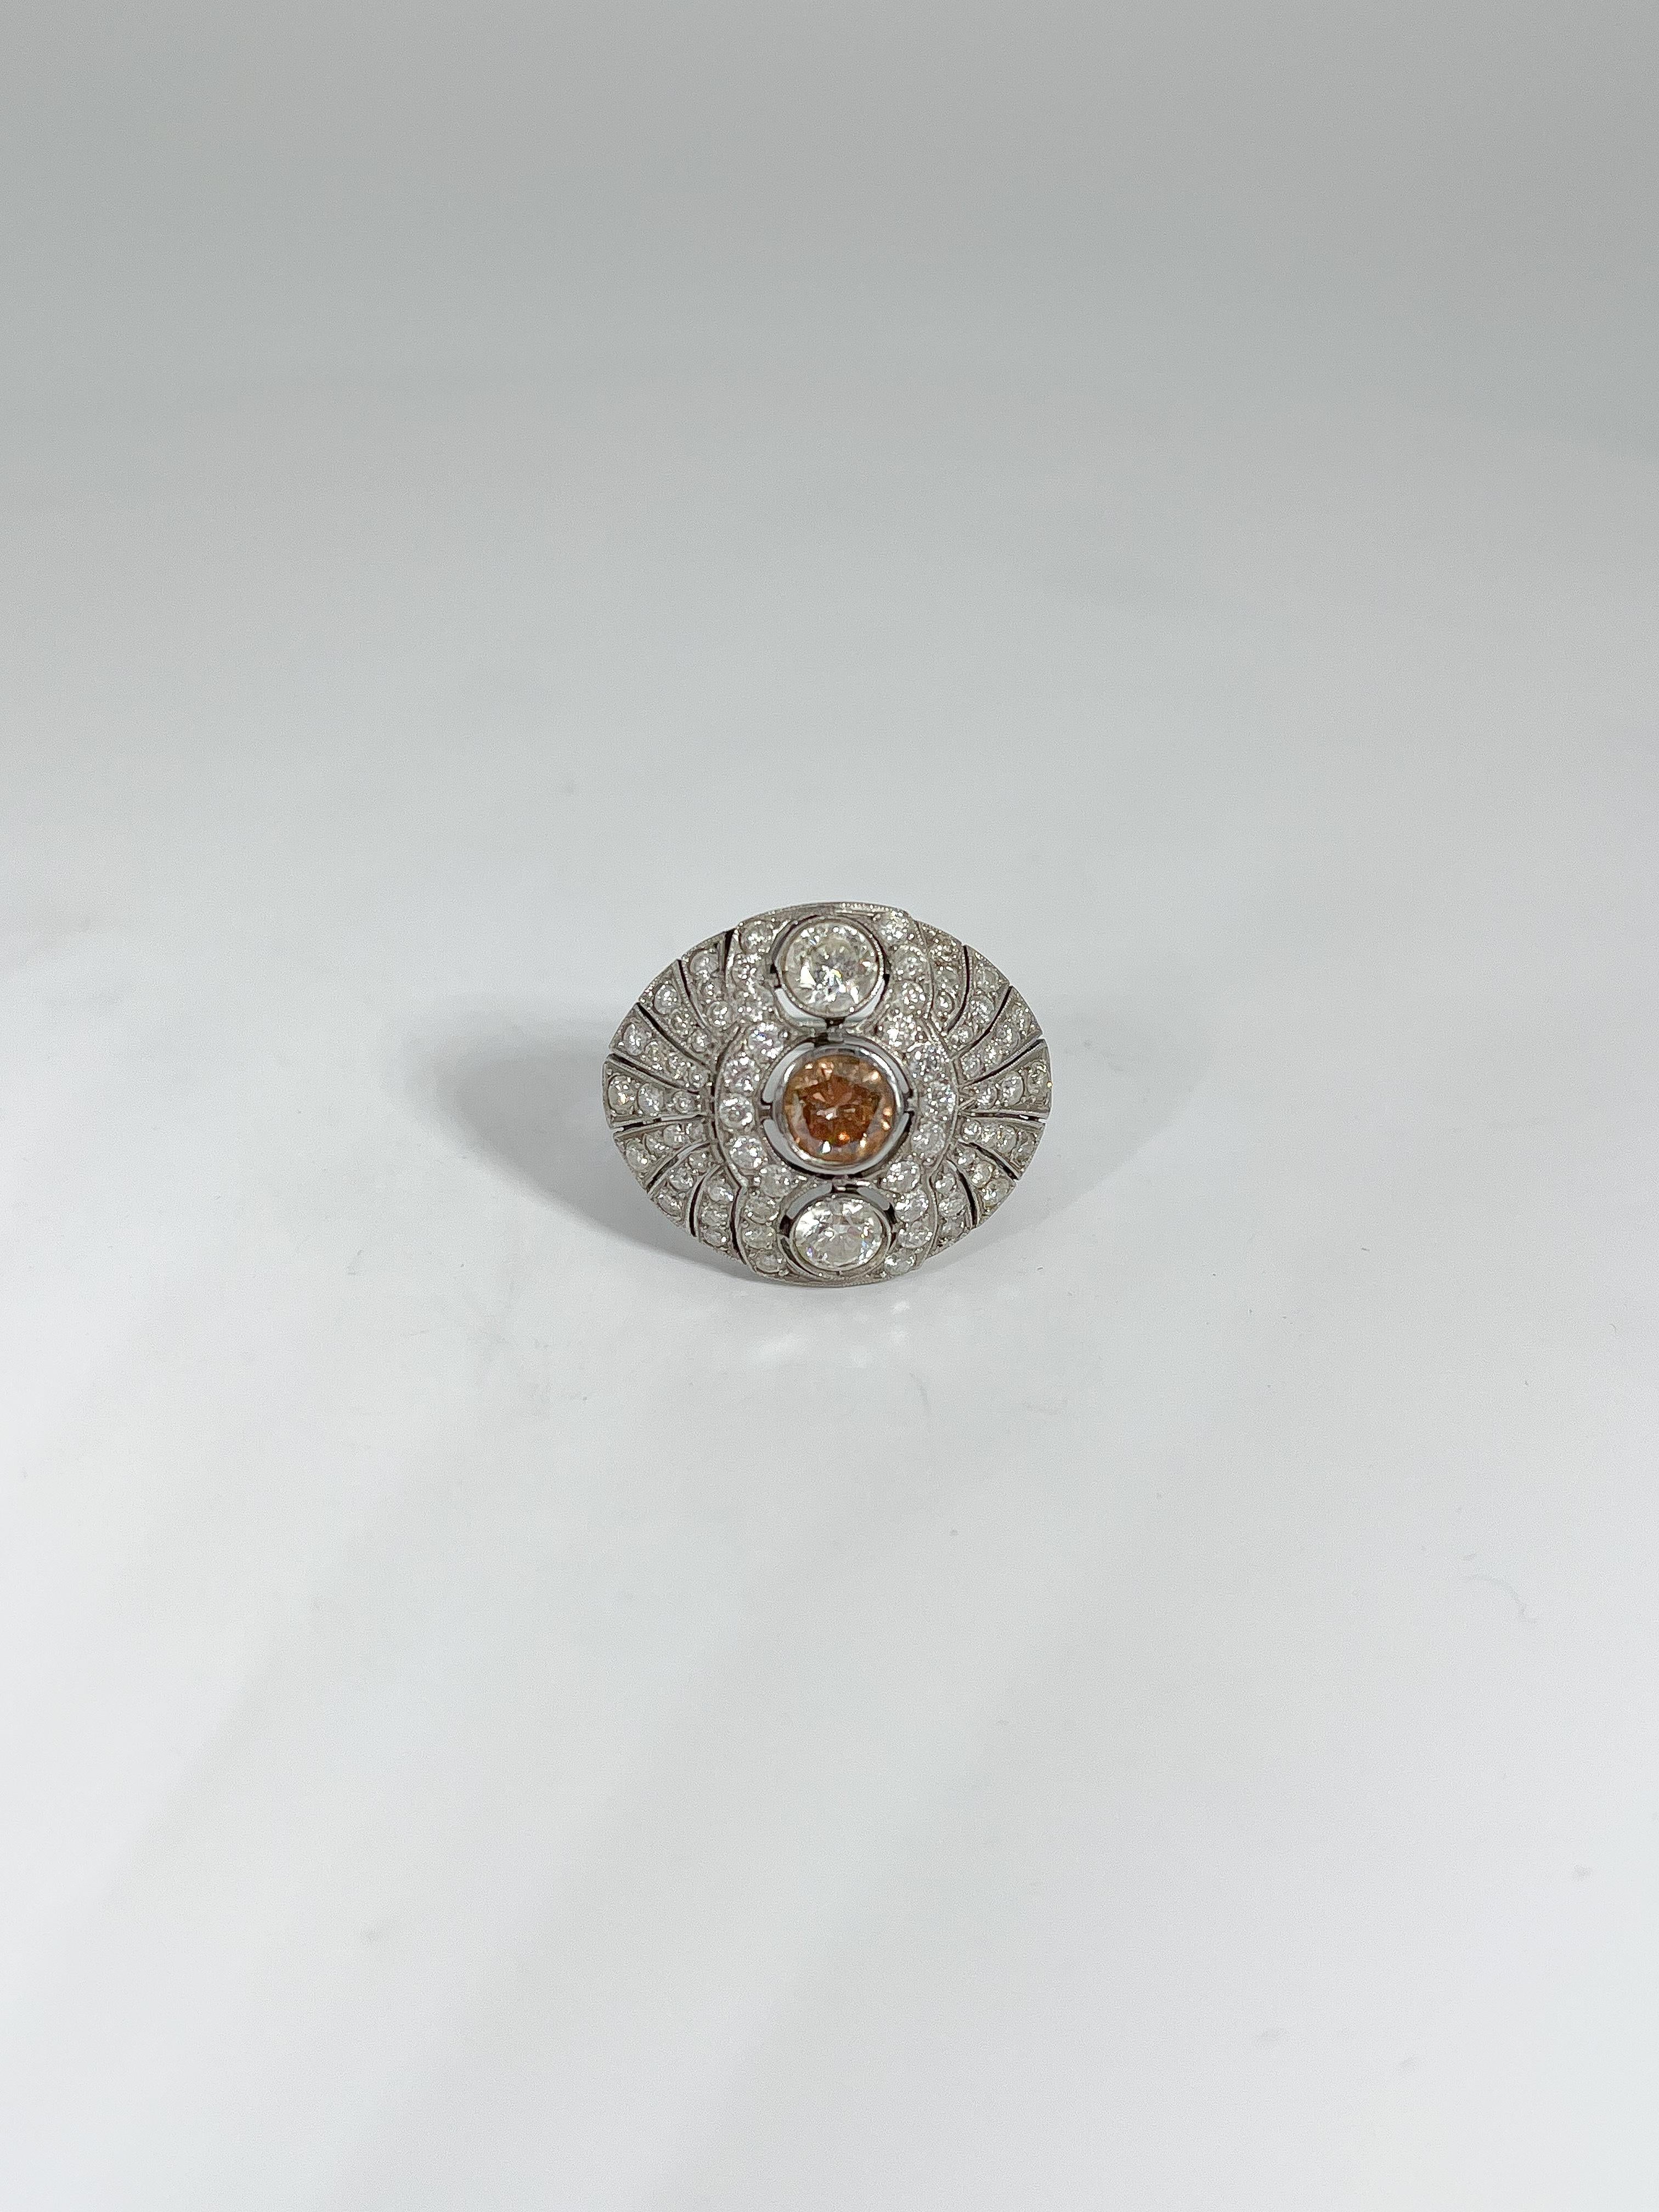 This unique platinum cocktail ring has 77 total diamonds including a beautiful cognac color diamond in the center. All stones are round cut. Ring measures size 7 1/4 and has a weight of 5.26.